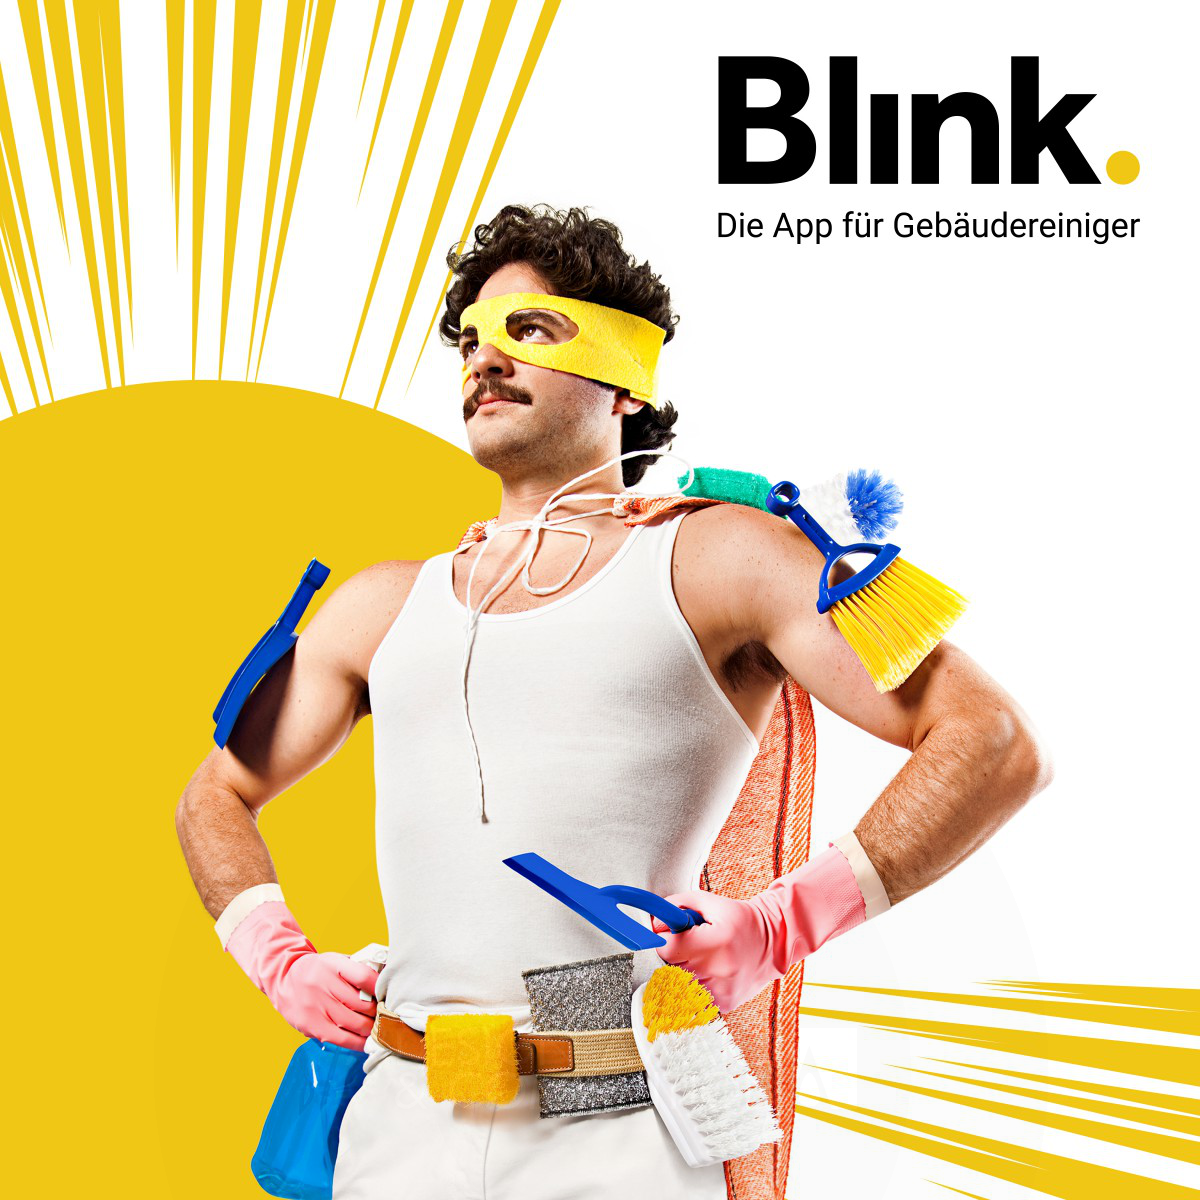 Blink App Image Campaign  by Bloom GmbH Nuernberg Iron Advertising, Marketing and Communication Design Award Winner 2024 